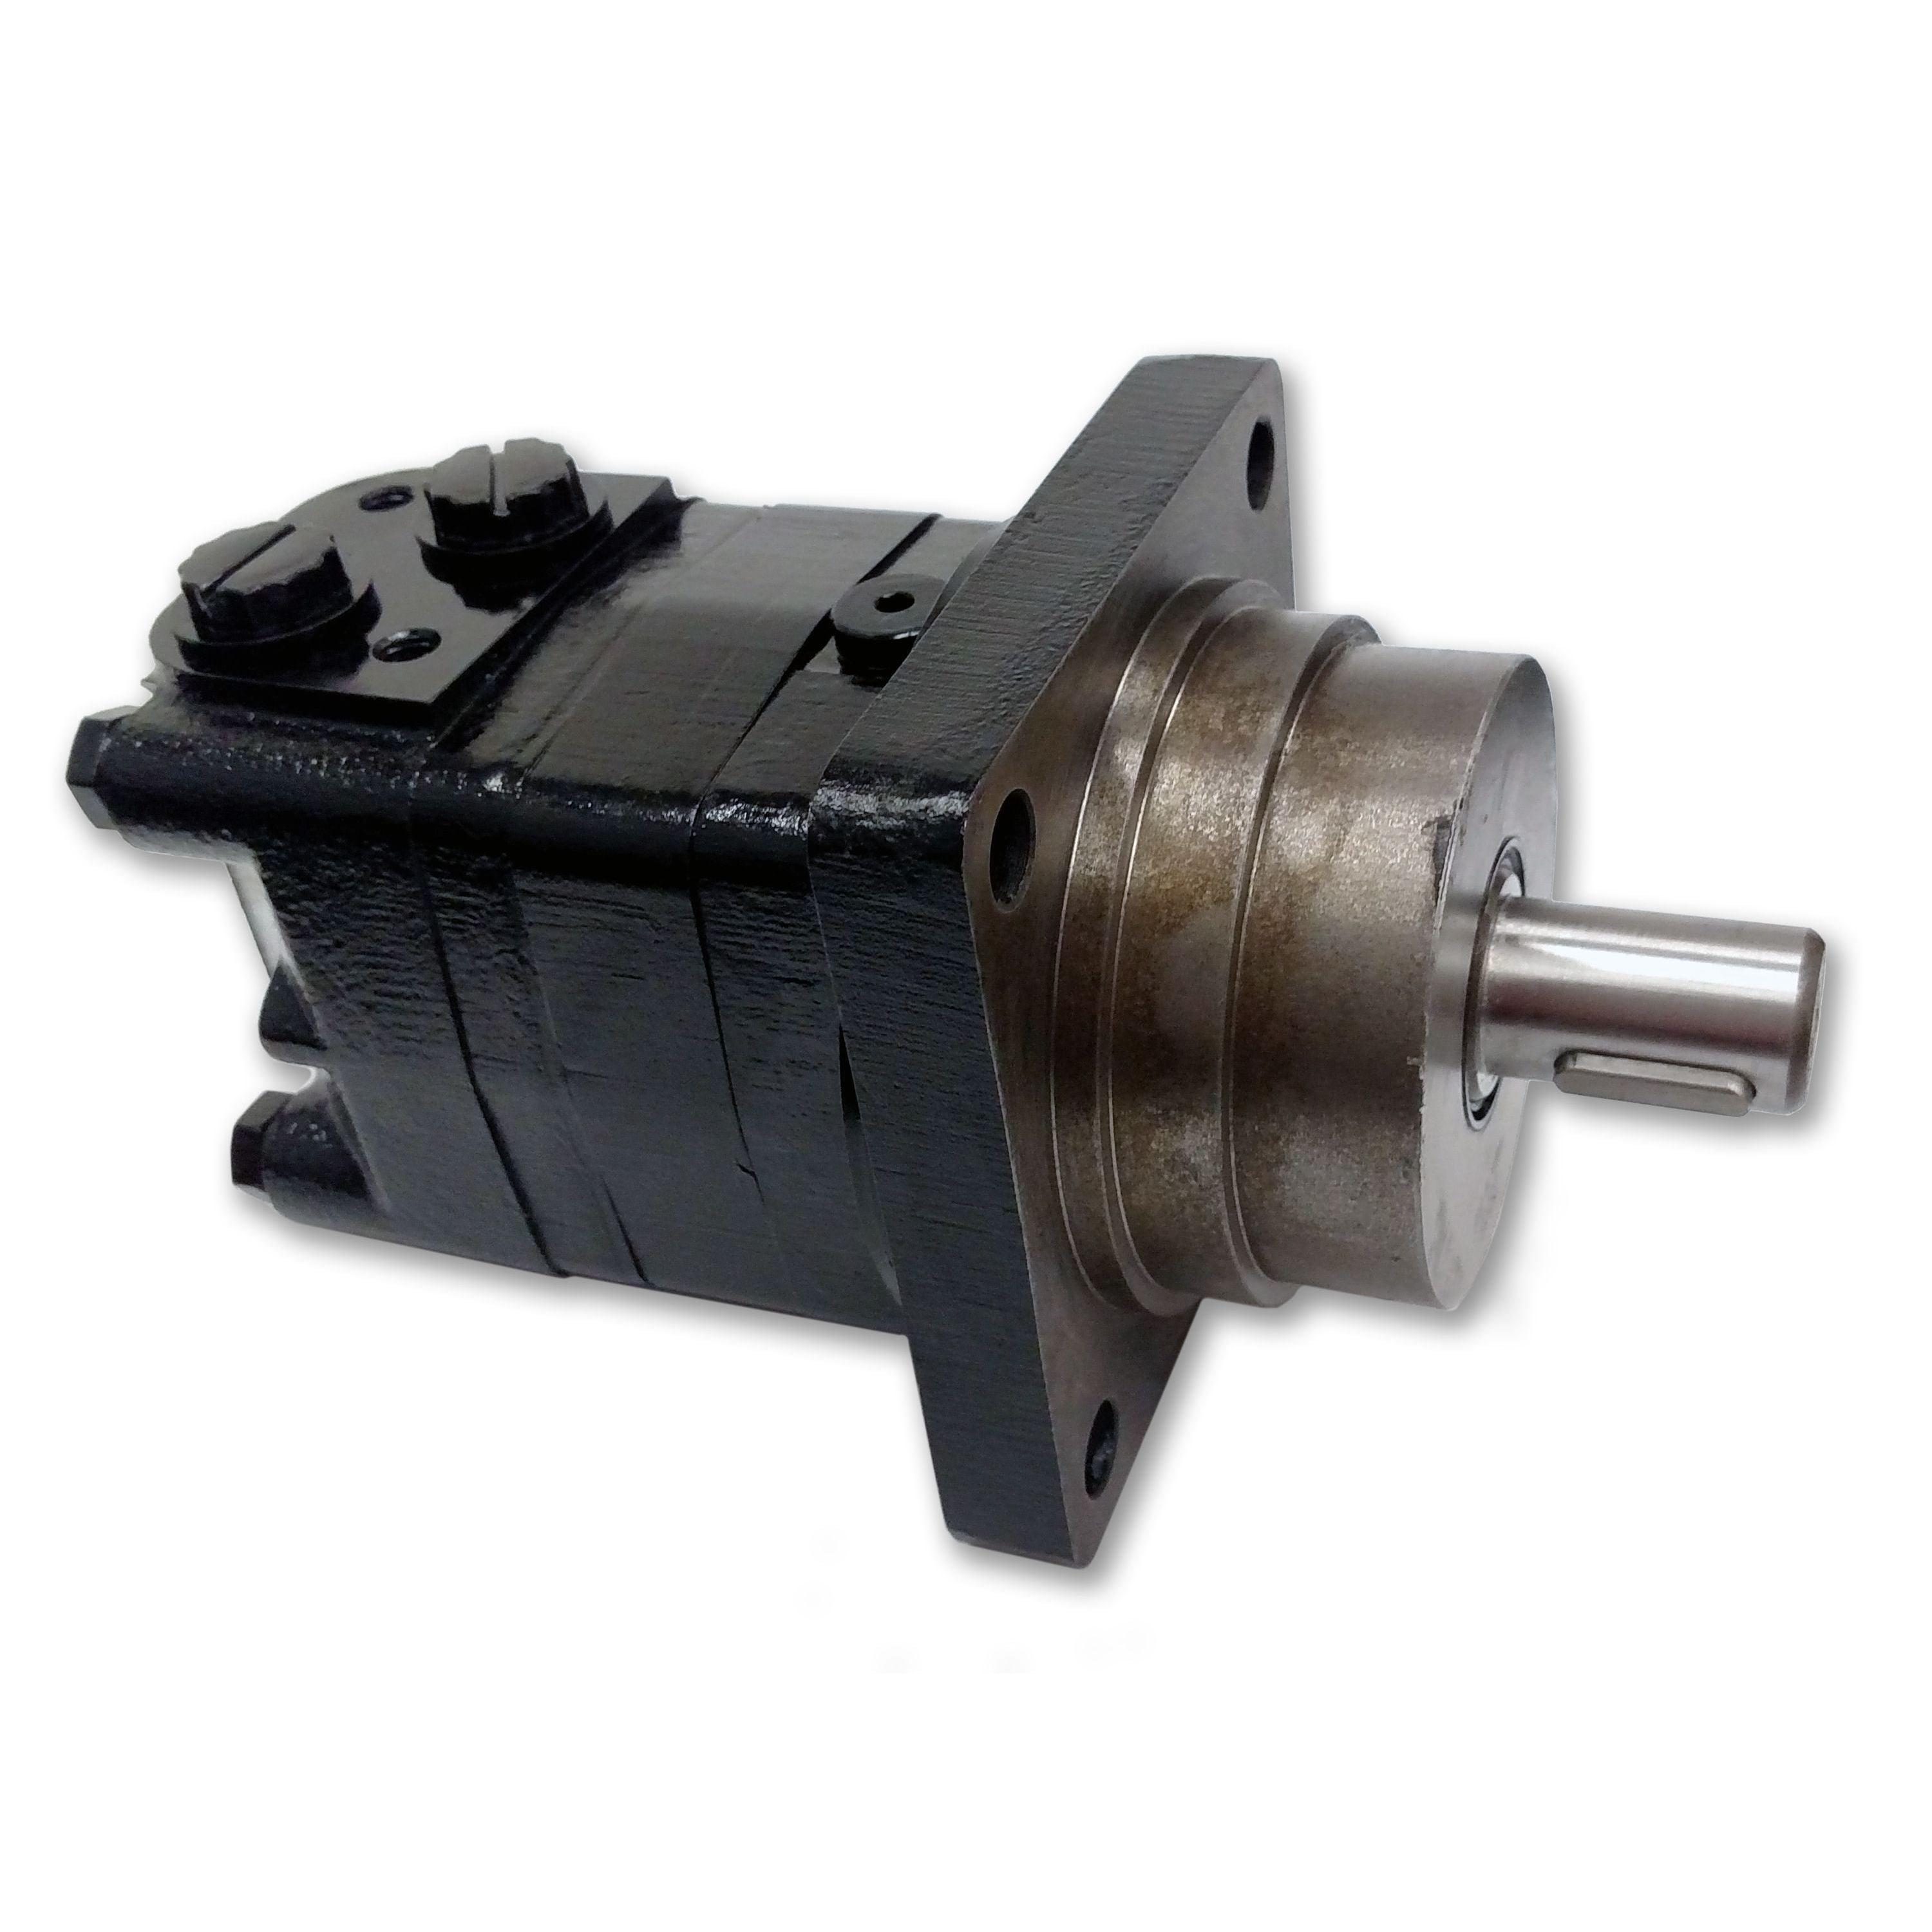 BMSY-475-WE-T4-S : Dynamic LSHT Motor, 475cc, 155RPM, 8053in-lb, 2030psi Differential, 19.81GPM, Wheel Mount, 1.25" Bore x 5/16" Key Shaft, Side Ported, #10 SAE (5/8")